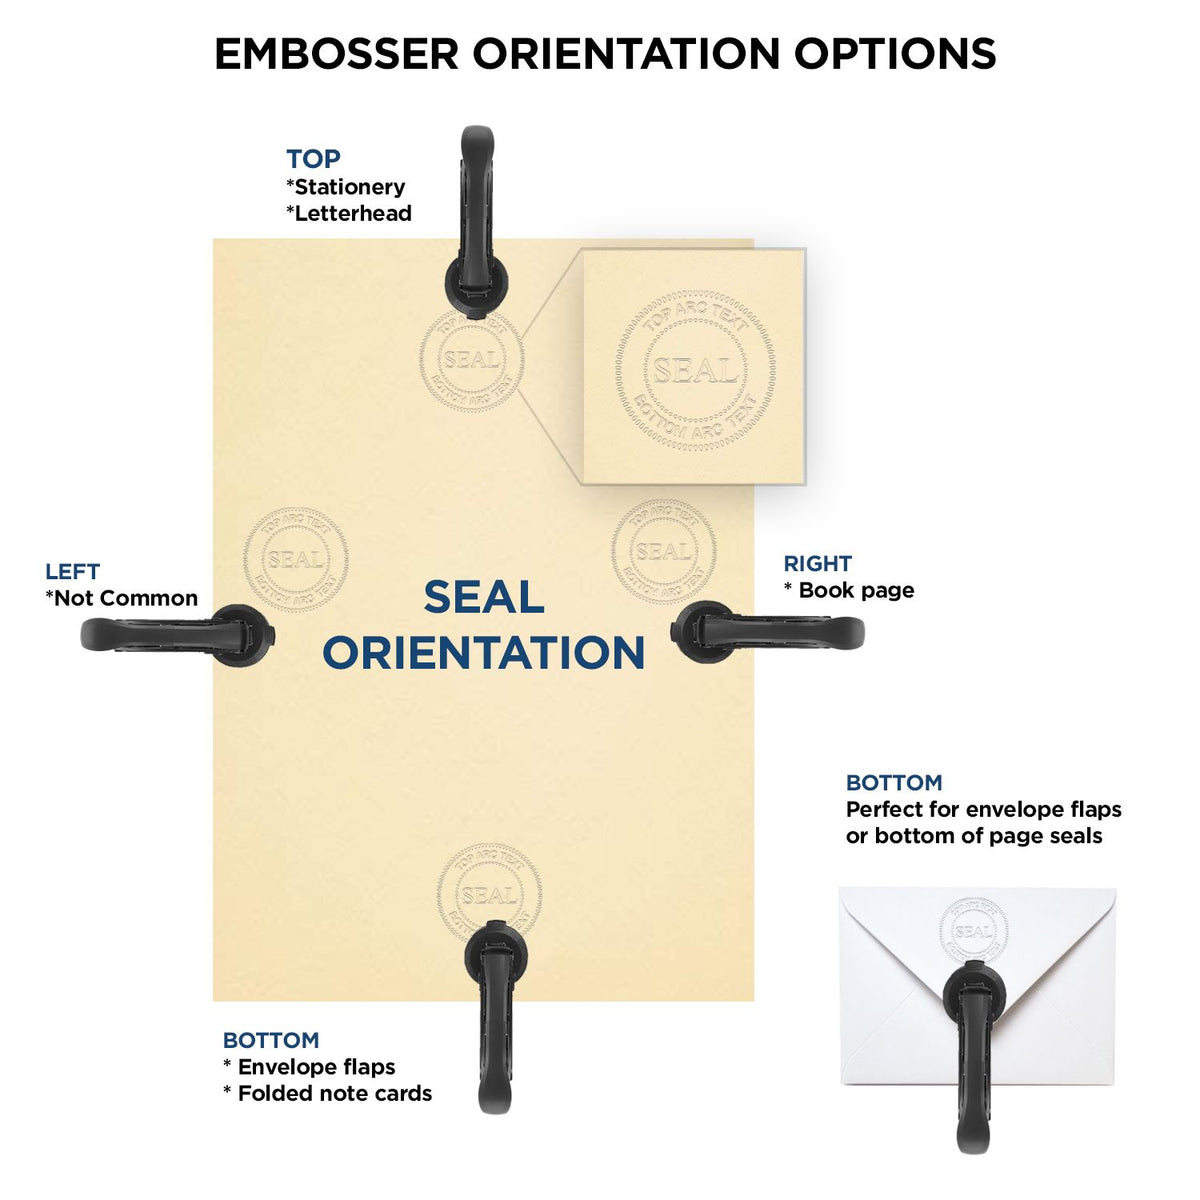 An infographic for the Soft Washington Professional Engineer Seal showing embosser orientation, this is showing examples of a top, bottom, right and left insert.